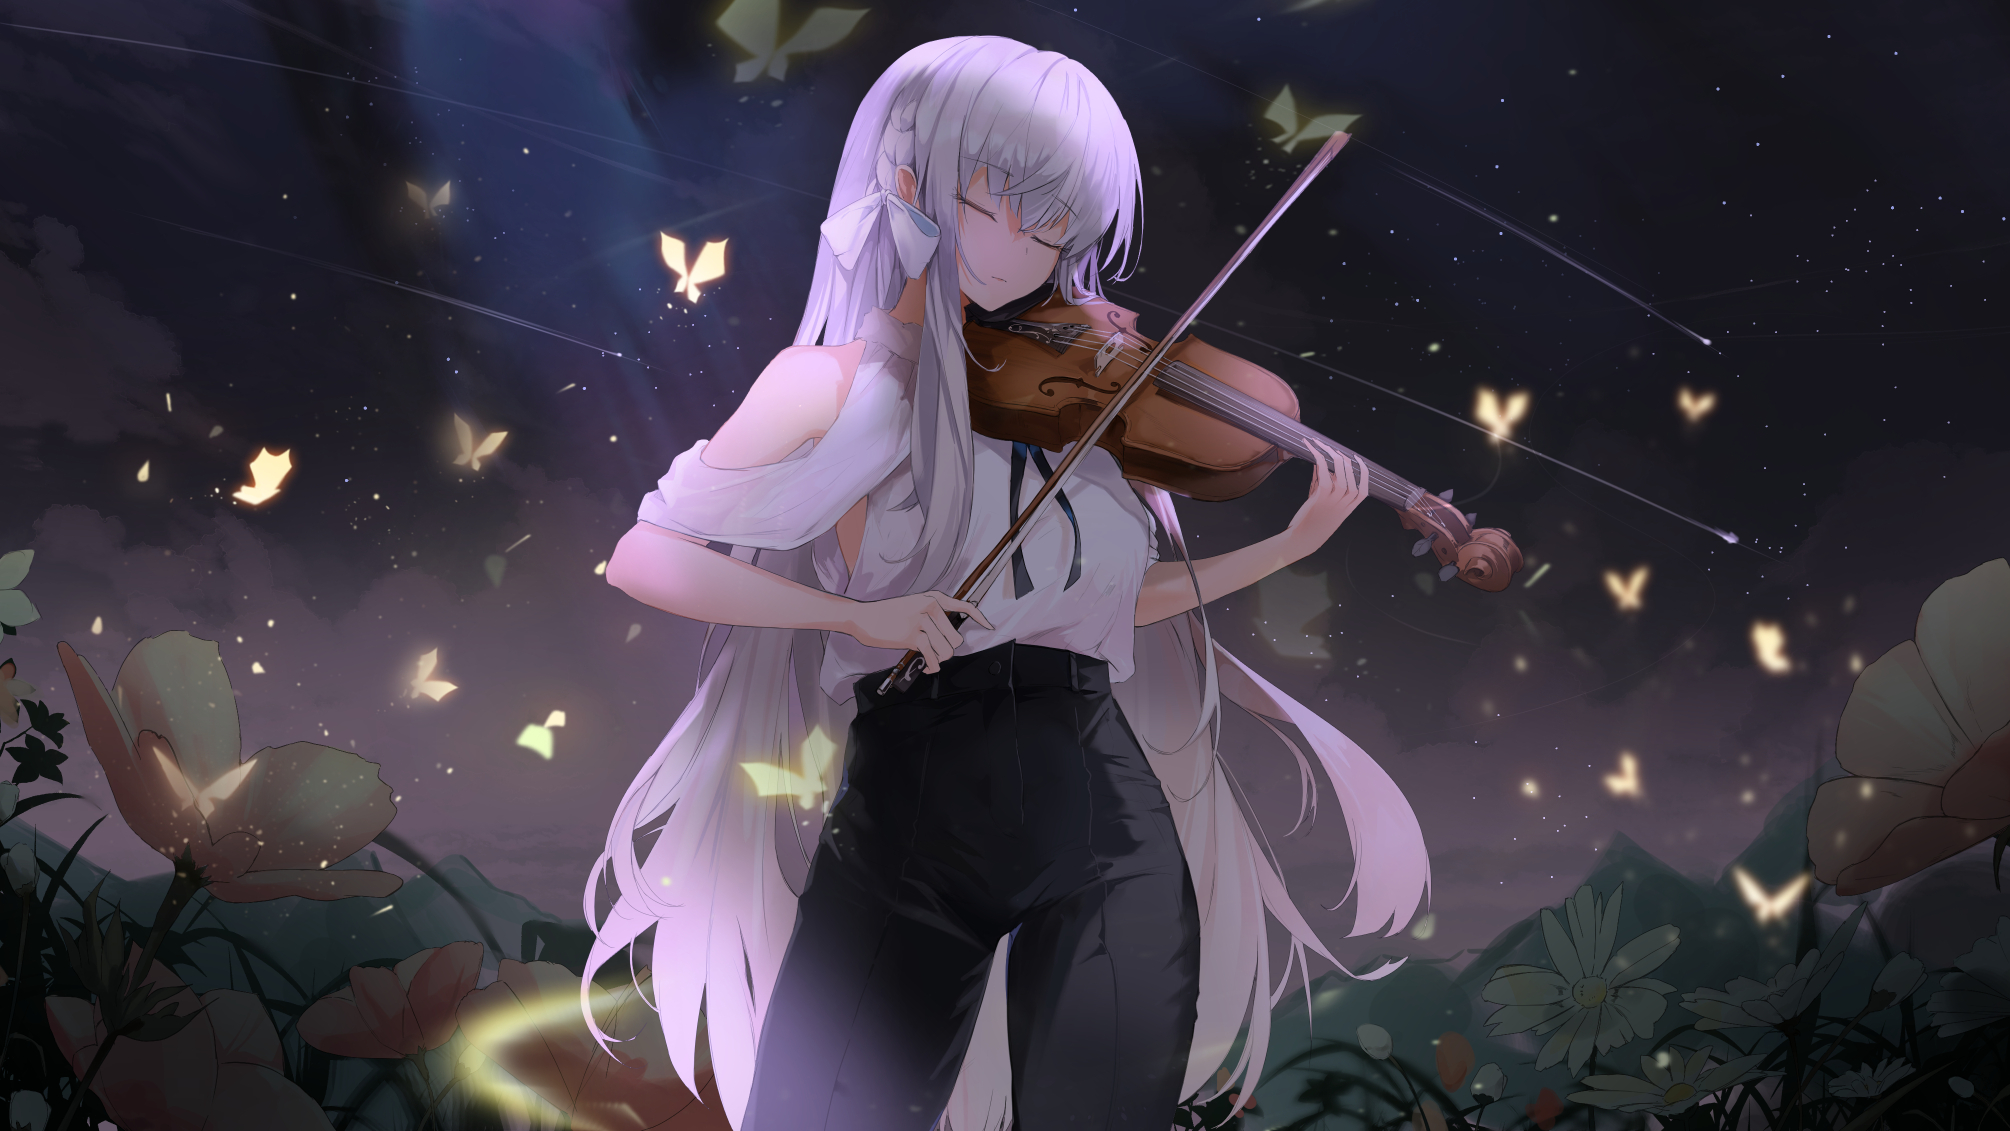 Anime girl playing the violin by クエモン